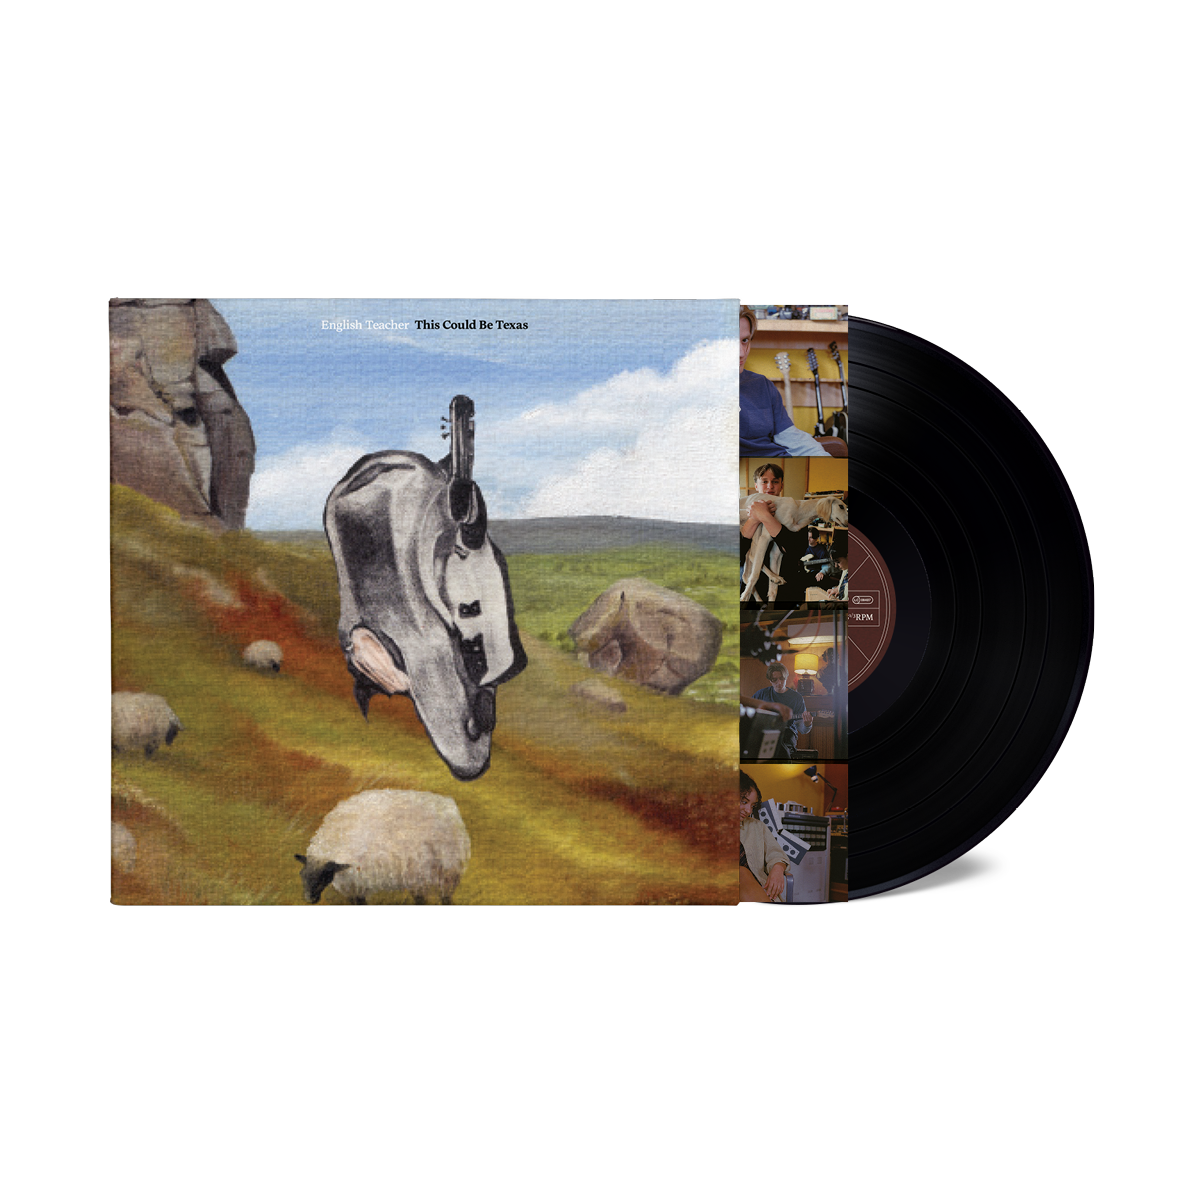 This Could be Texas: Vinyl LP + Exclusive Signed Art Card